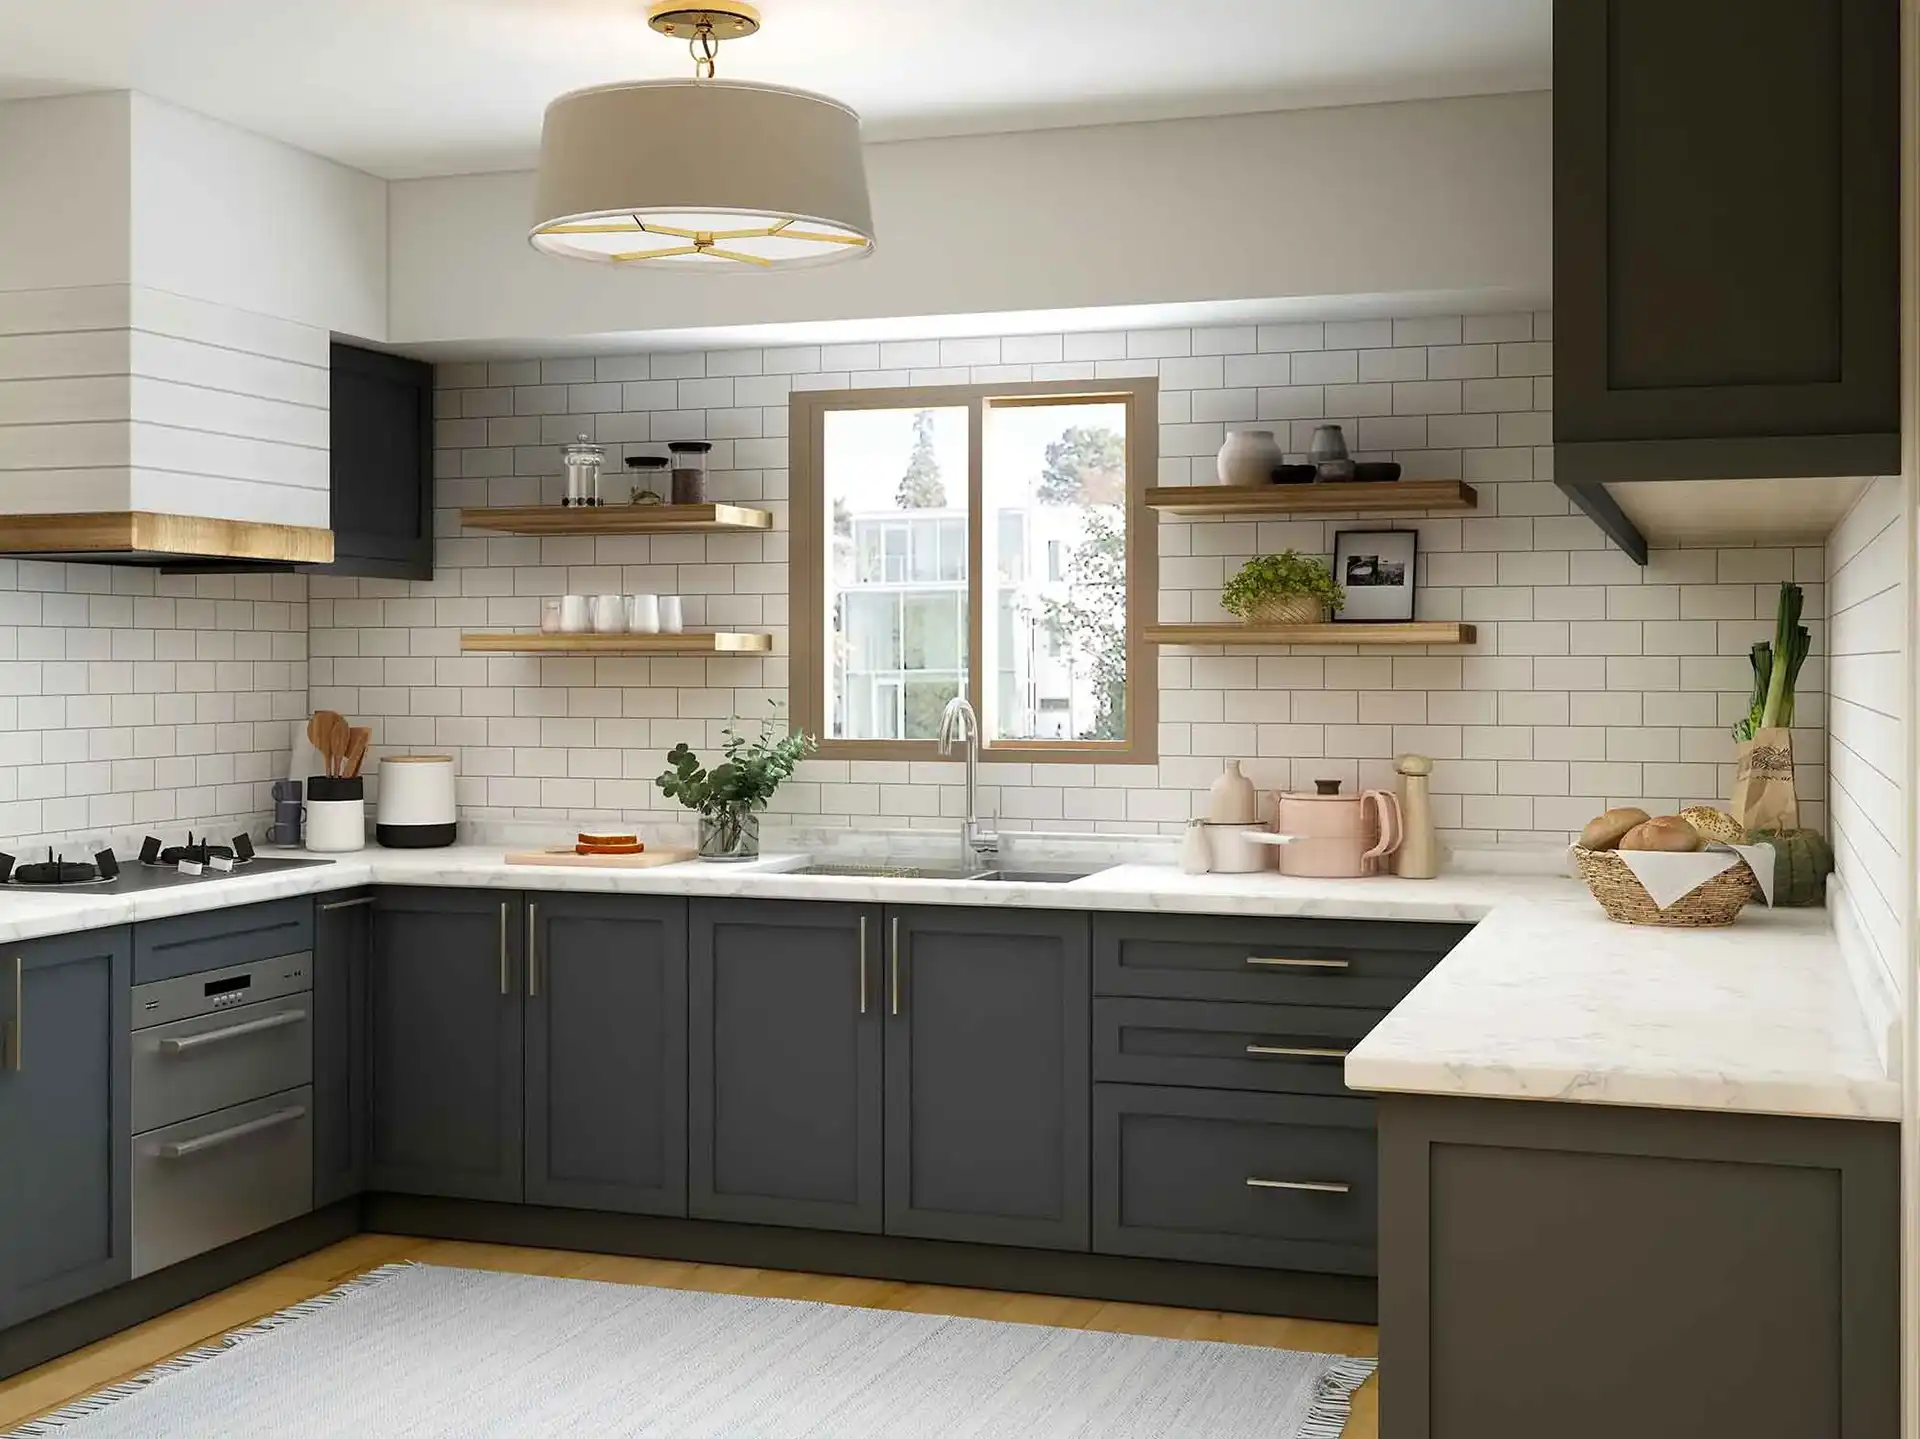 An image of a kitchen with dark grey shaker style cabinets, wooden floating shelves, white subway tile backsplash, and stainless steel appliances.